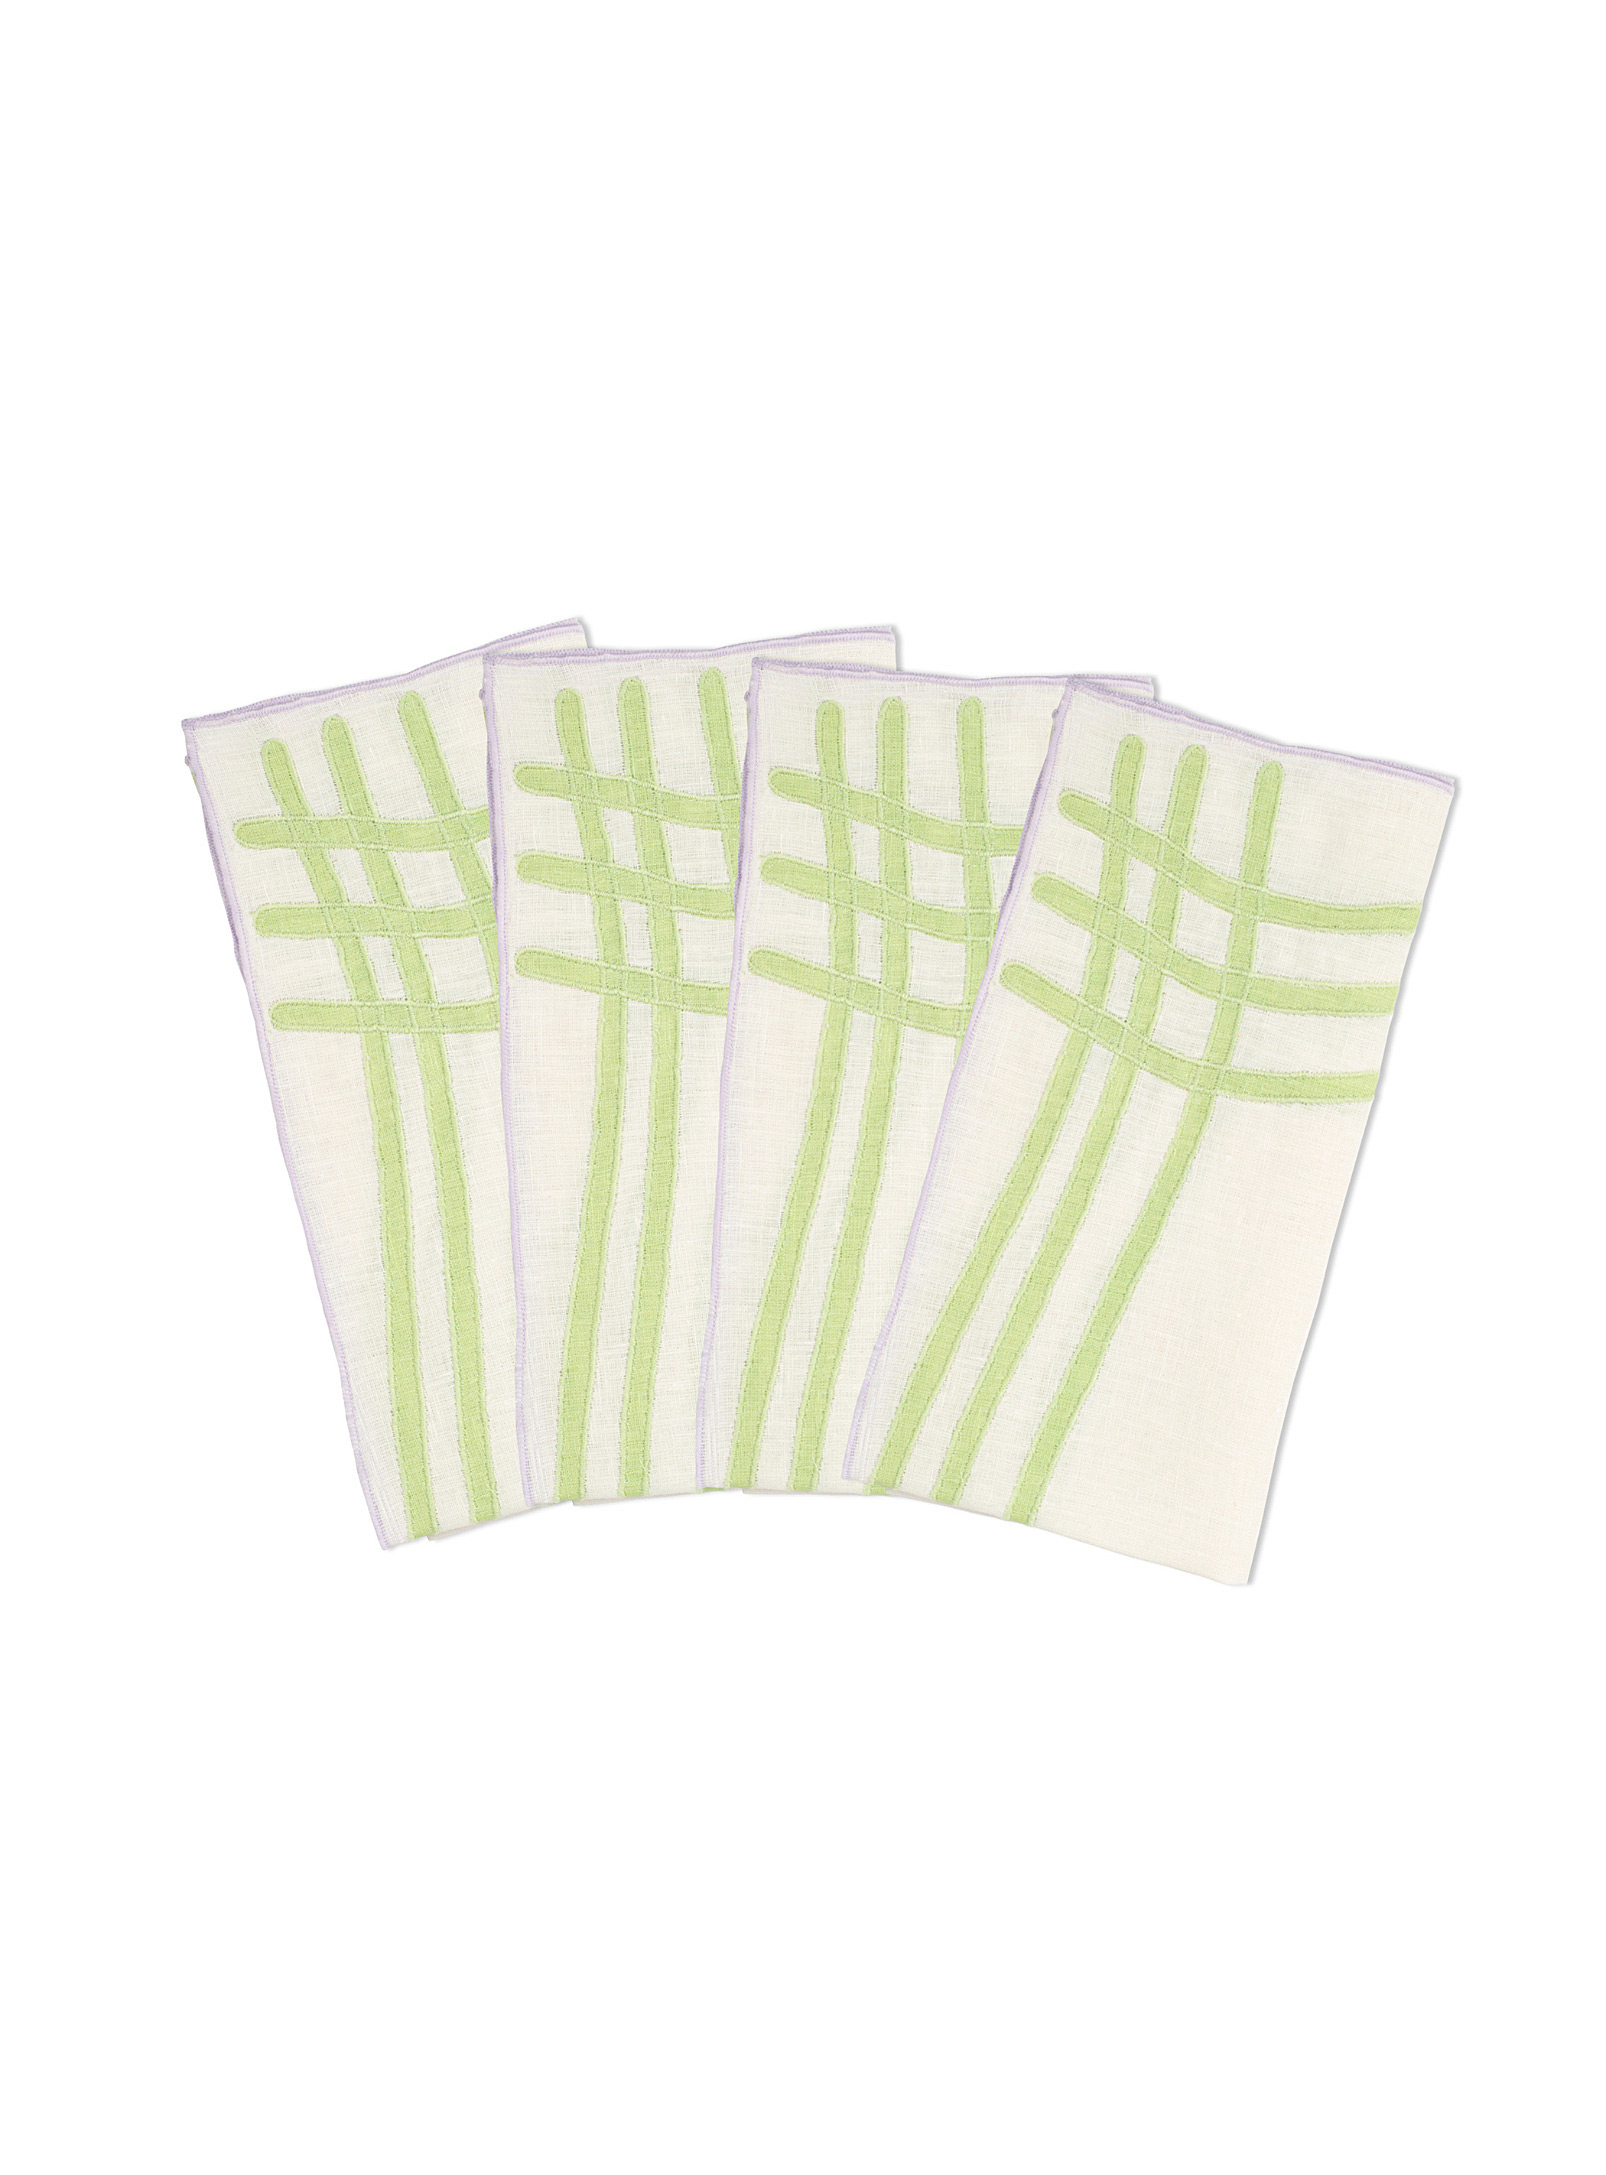 Misette Wavy Checkers Linen Napkins Set Of 4 In Lime Green